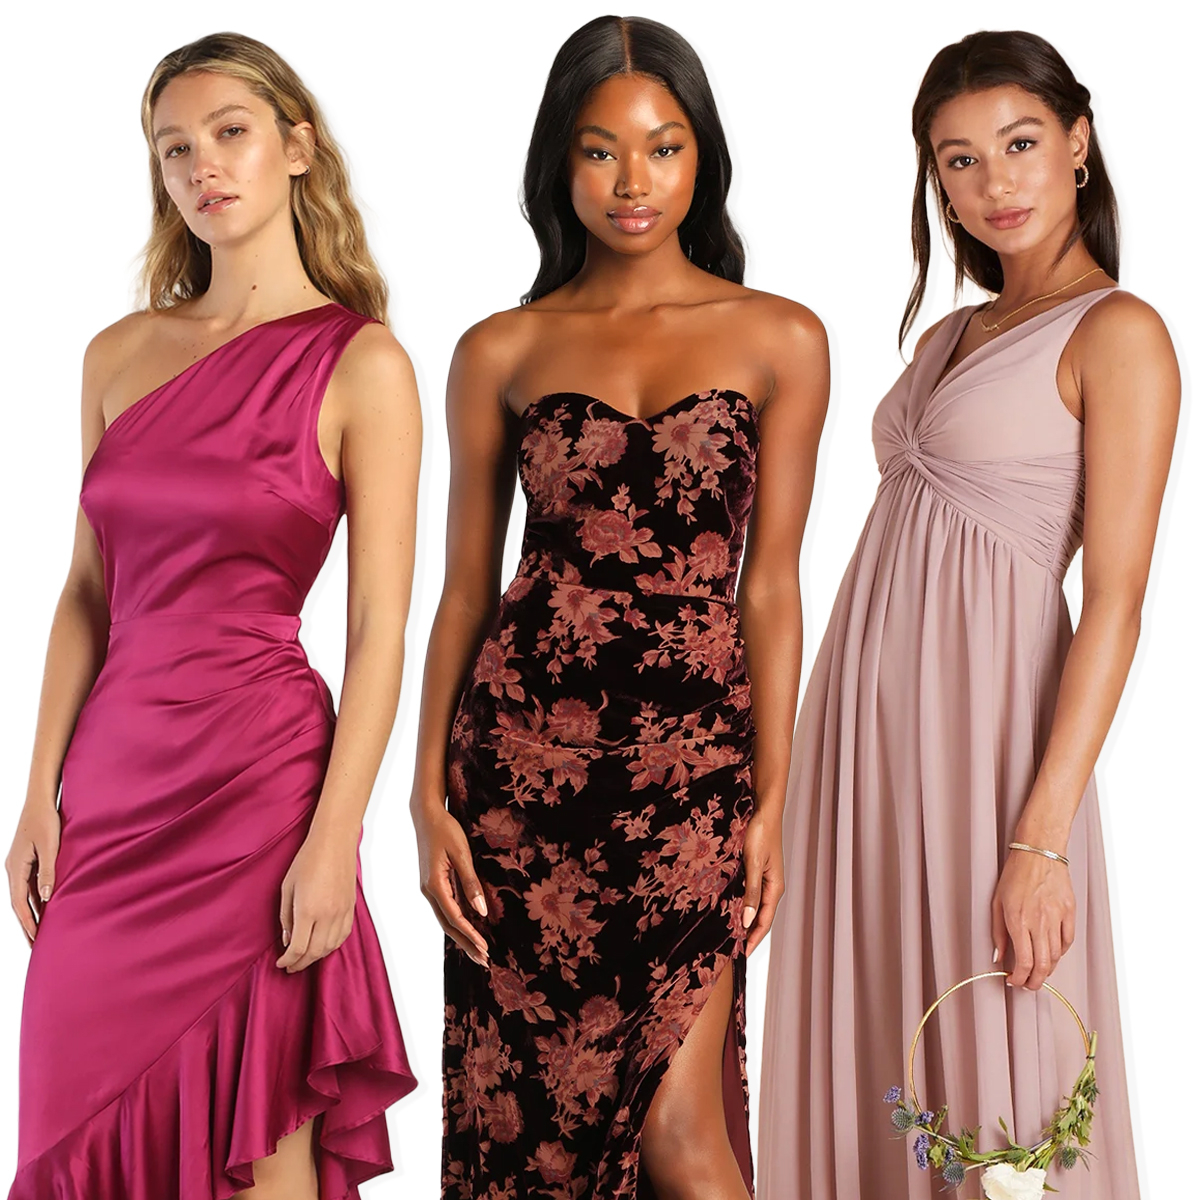 https://akns-images.eonline.com/eol_images/Entire_Site/2023215/rs_1200x1200-230315153806-1200-Ecomm-Wedding-Guest-Dresses.jpg?fit=around%7C1080:1080&output-quality=90&crop=1080:1080;center,top